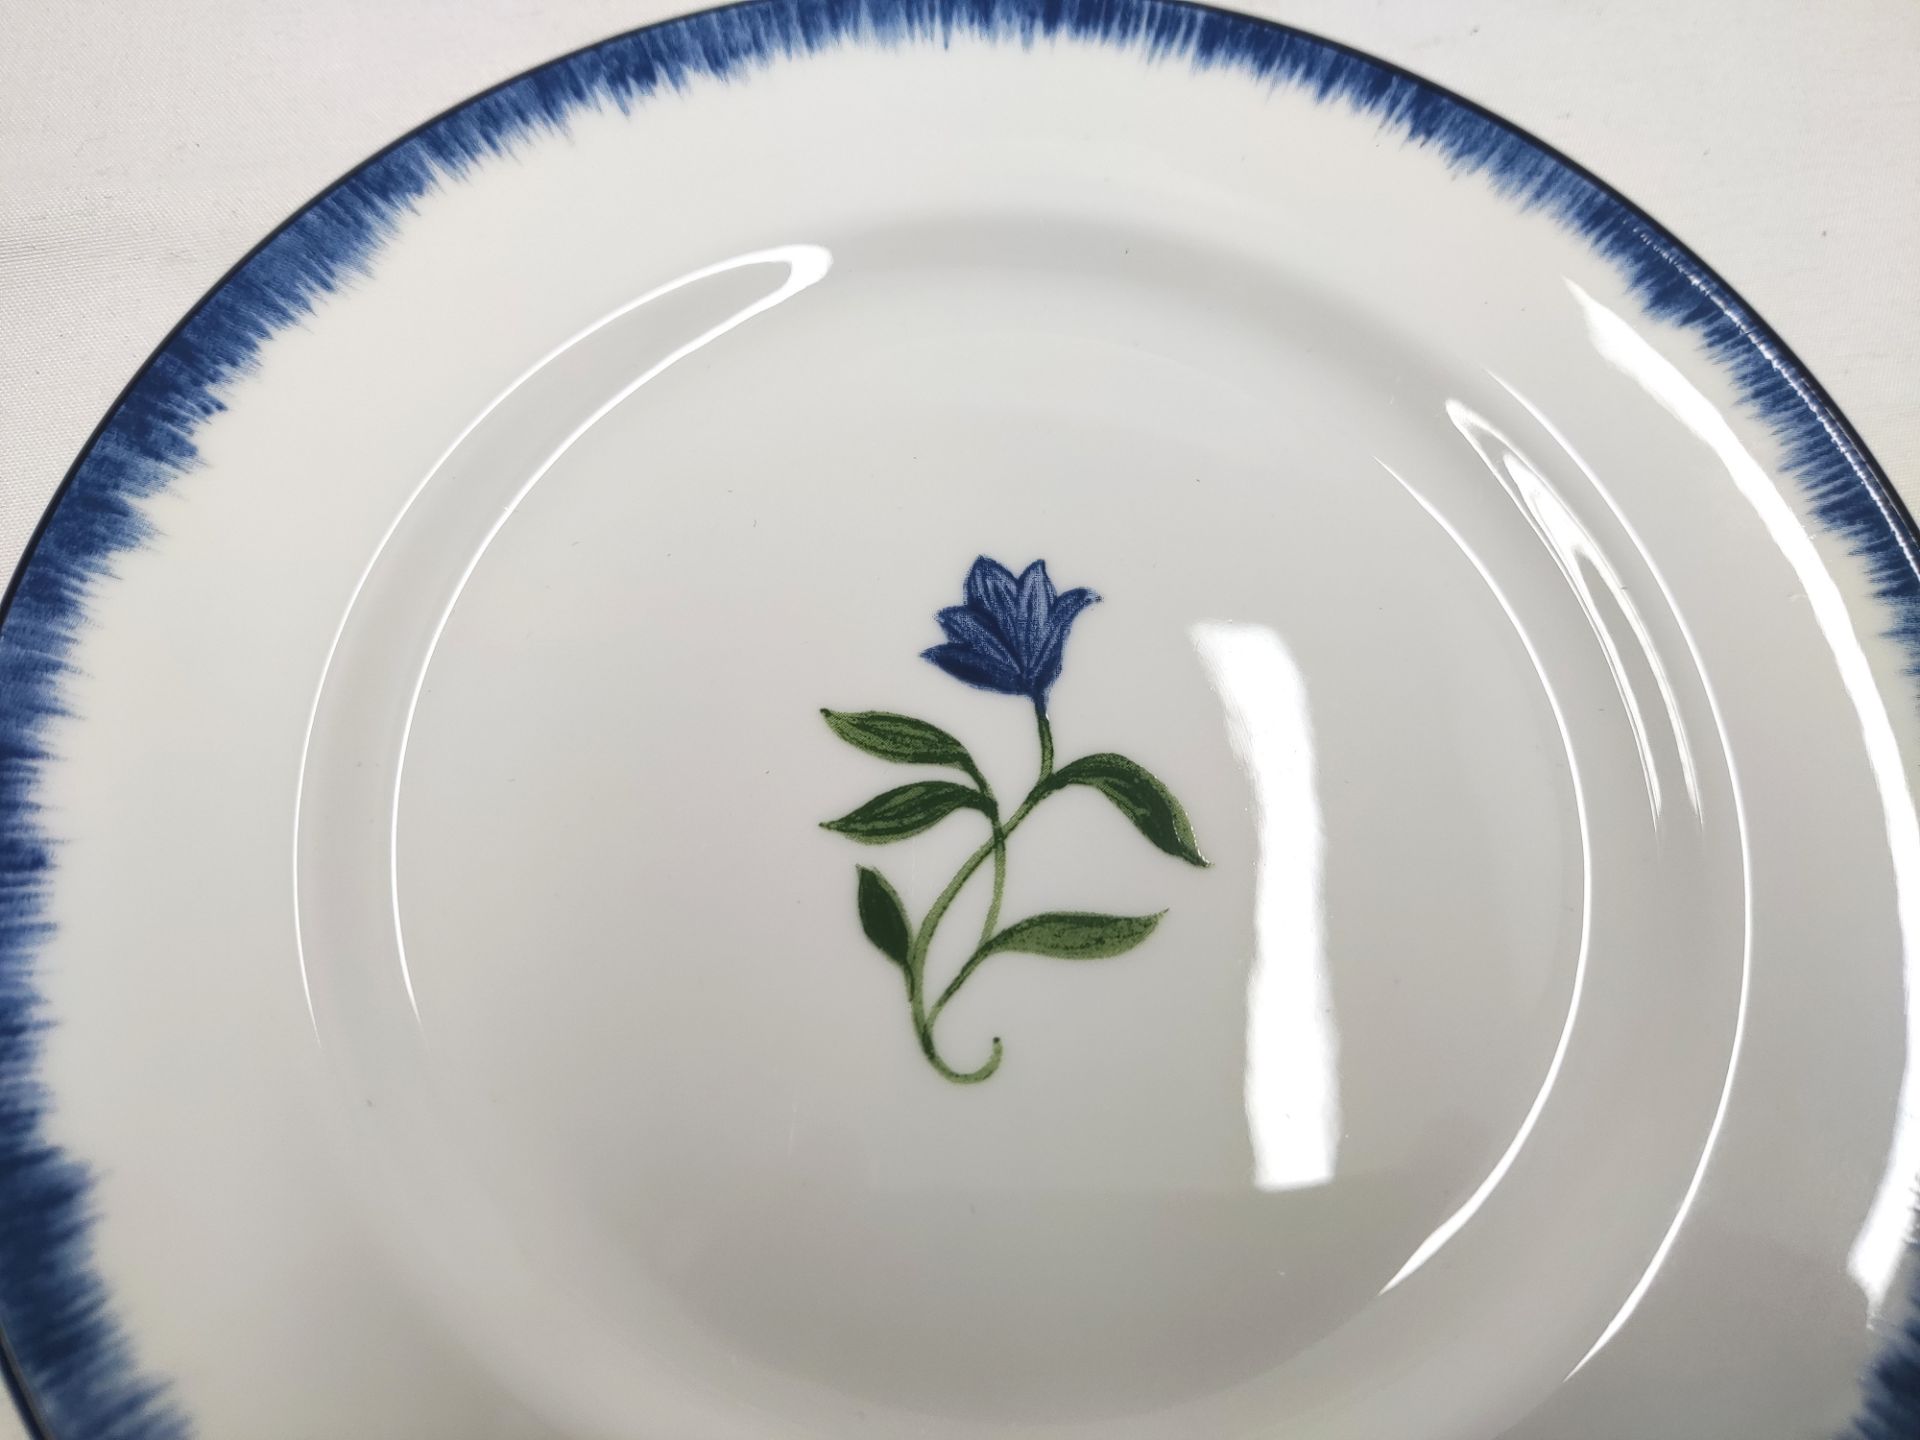 1 x HALCYON DAYS Nina Campbell Marguerite 6" Side Plate - New/Boxed - Original RRP £59.00 - Image 4 of 10